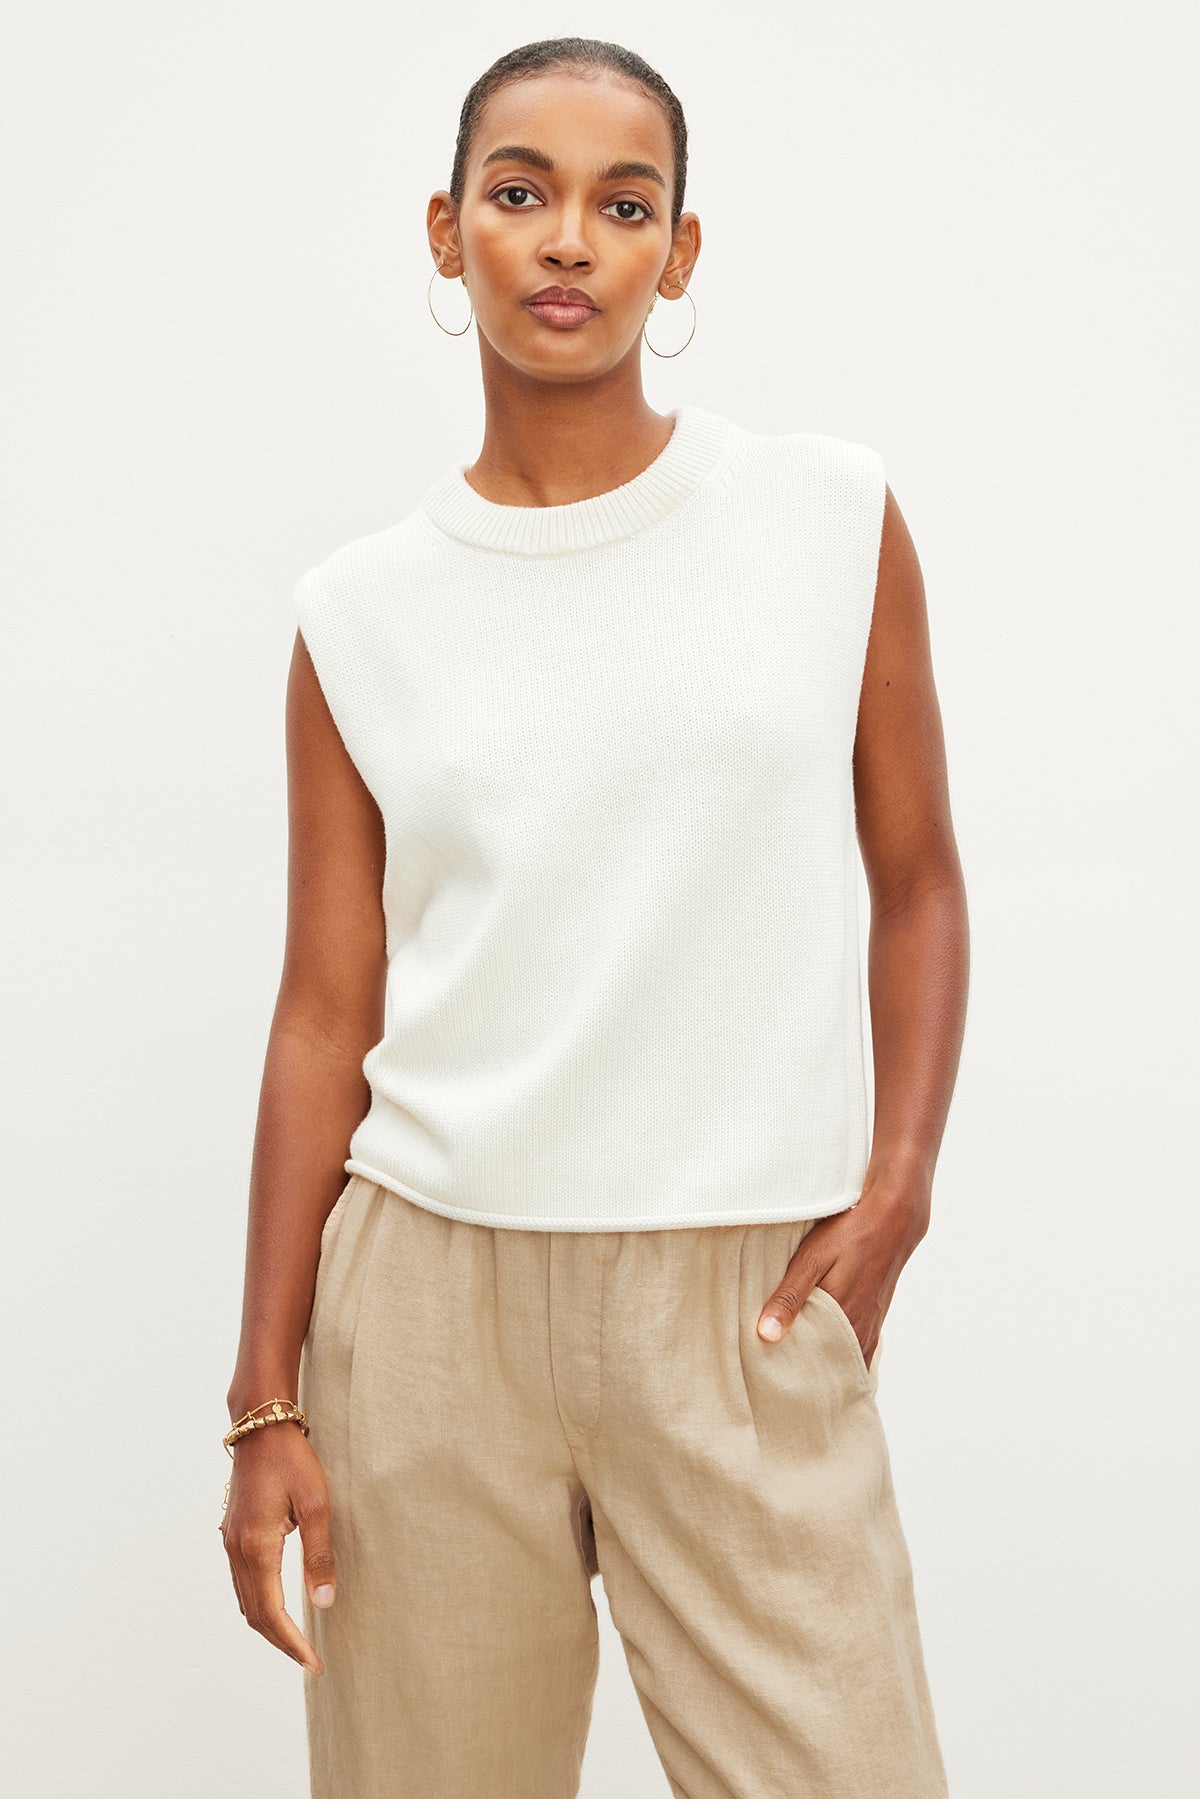 The model is wearing a white sleeveless ASTER CREW NECK SWEATER made from a luxurious cotton cashmere blend by Velvet by Graham & Spencer.-35955418464449